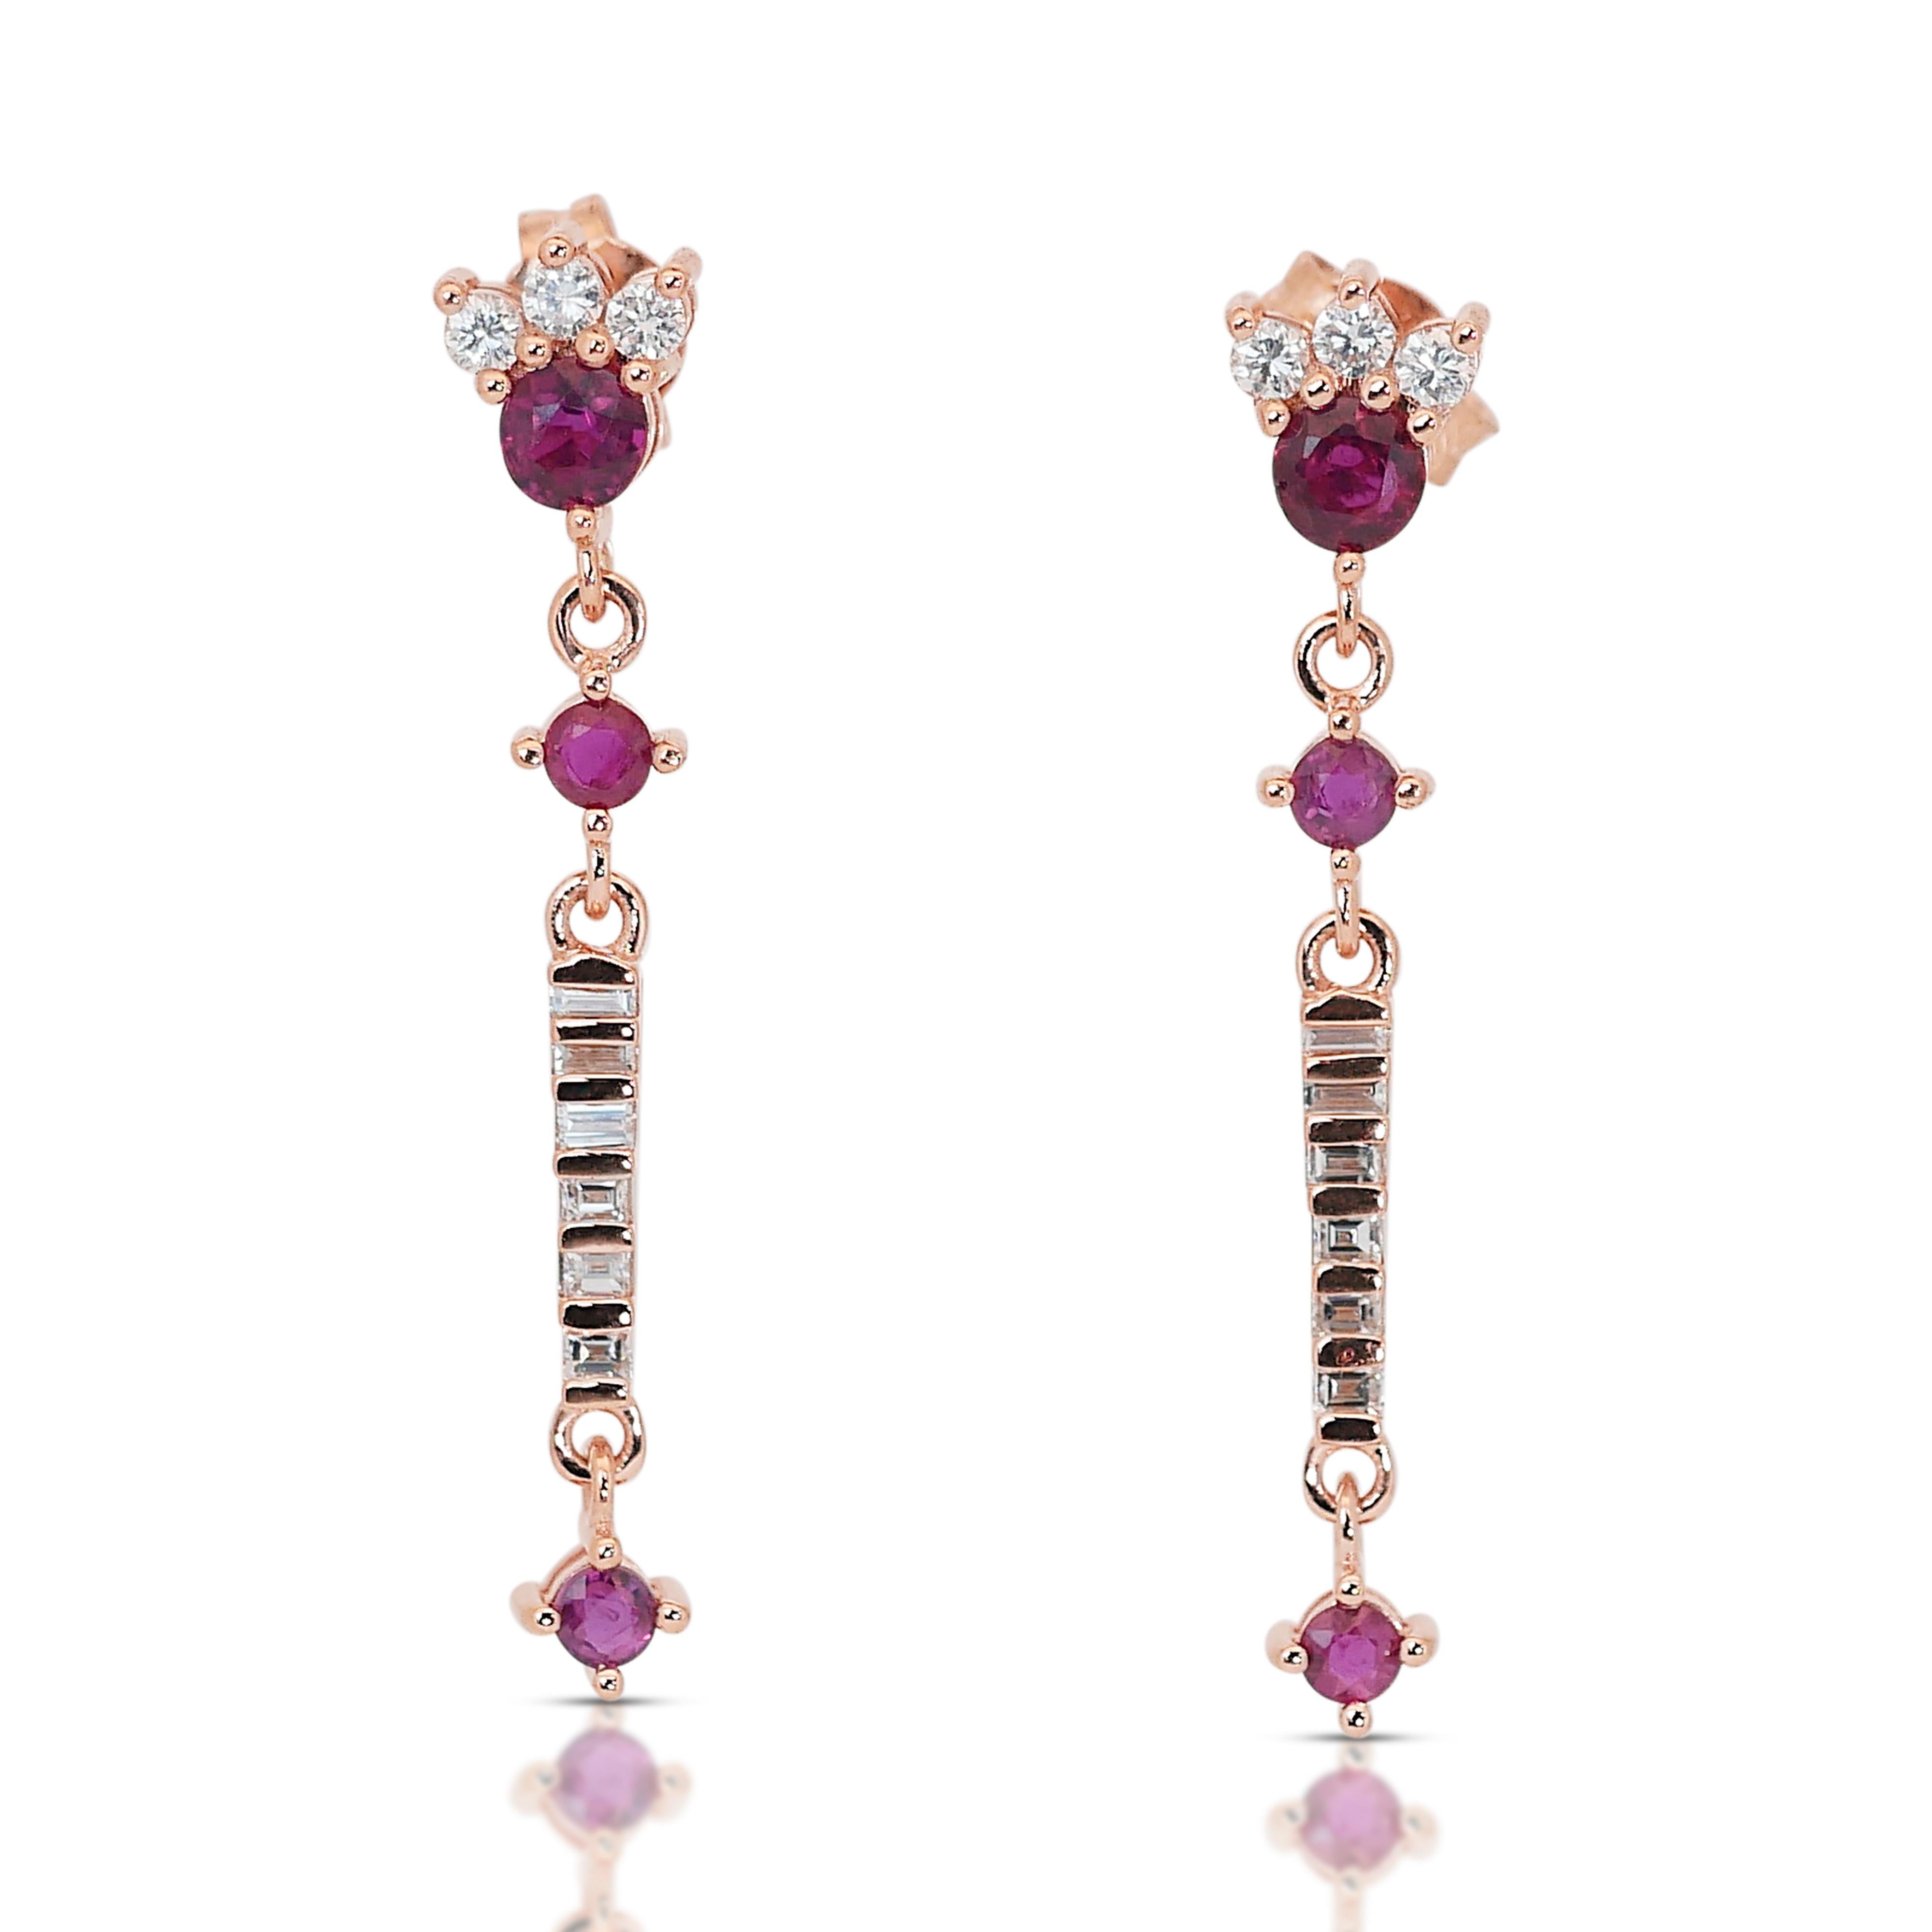 Glittering 14k Rose Gold Rubies and Diamonds Drop Earrings w/1.20 ct - IGI Certified

This glittering drop earrings, crafted in luxurious 14k rose gold, boasts a vibrant display of gemstones. The centerpiece features six round rubies totaling 0.80